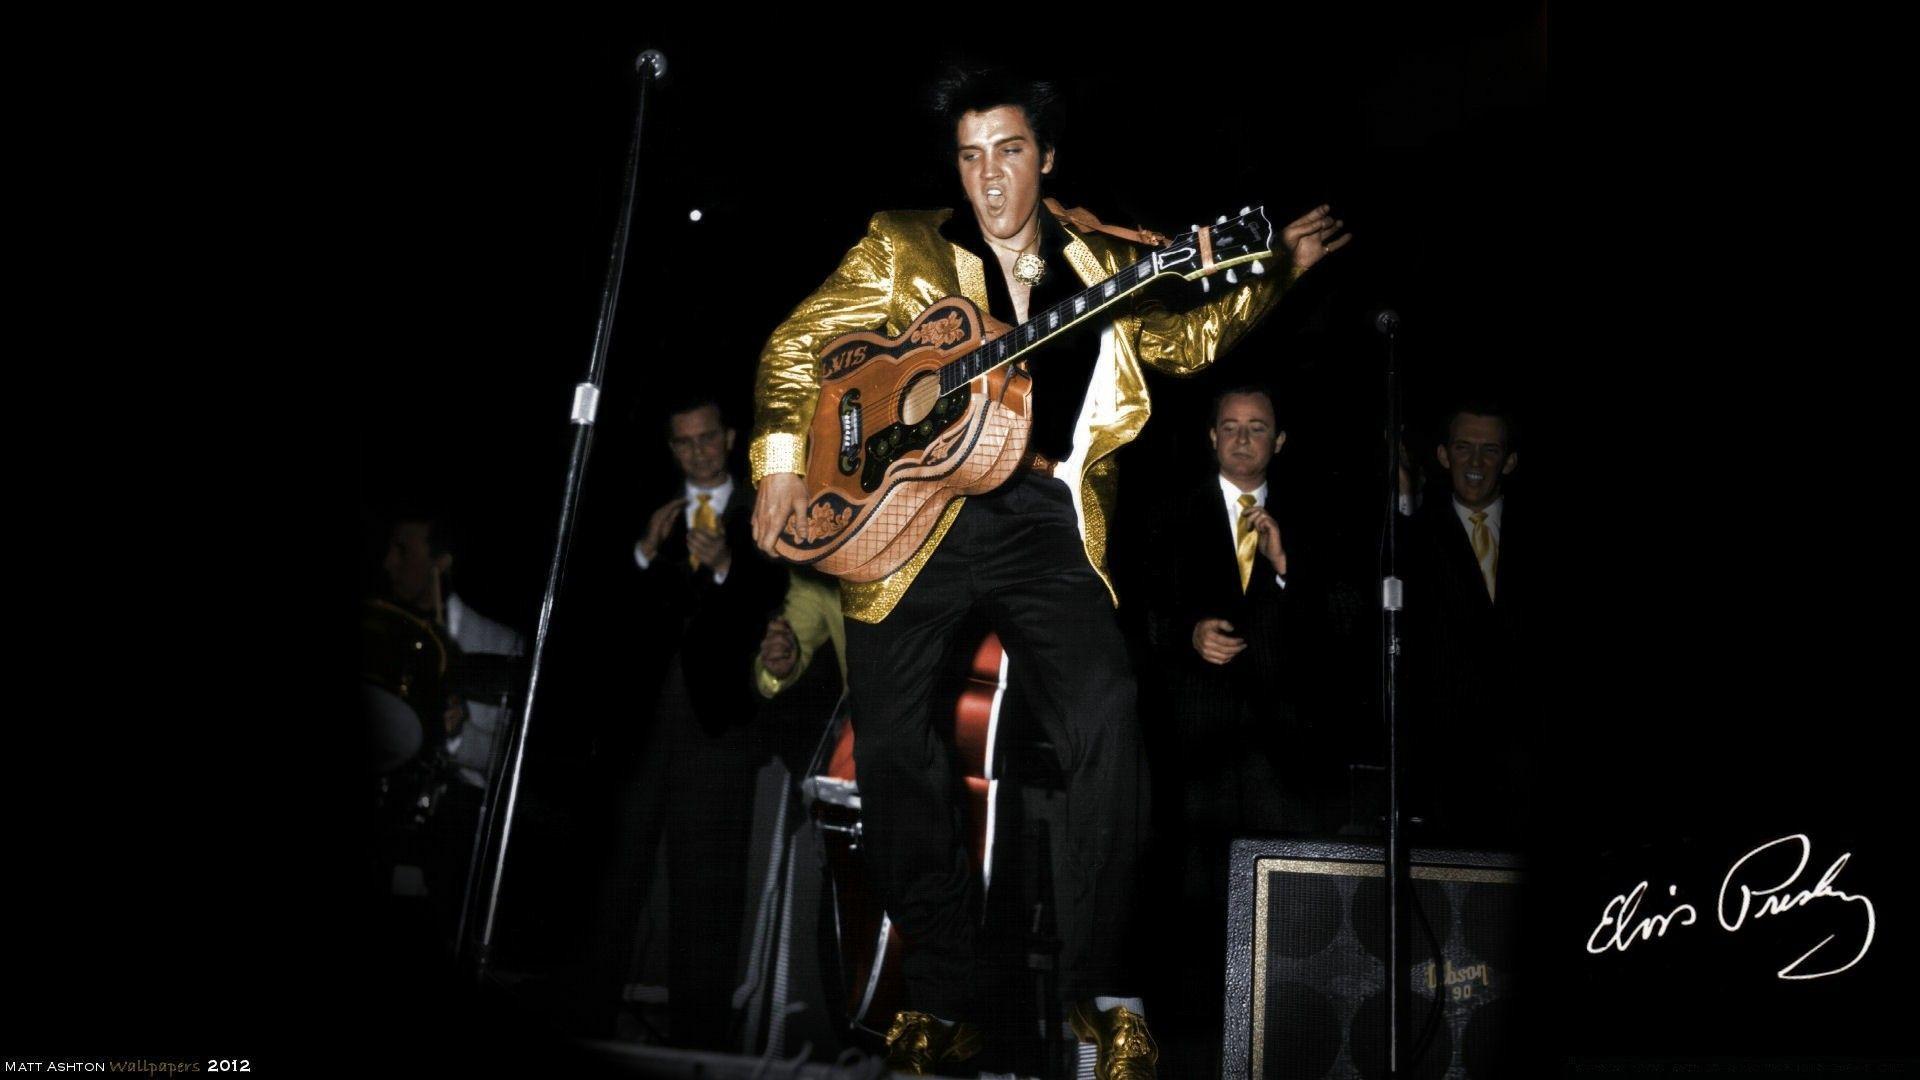 Elvis Presley 1956. Android wallpaper for free